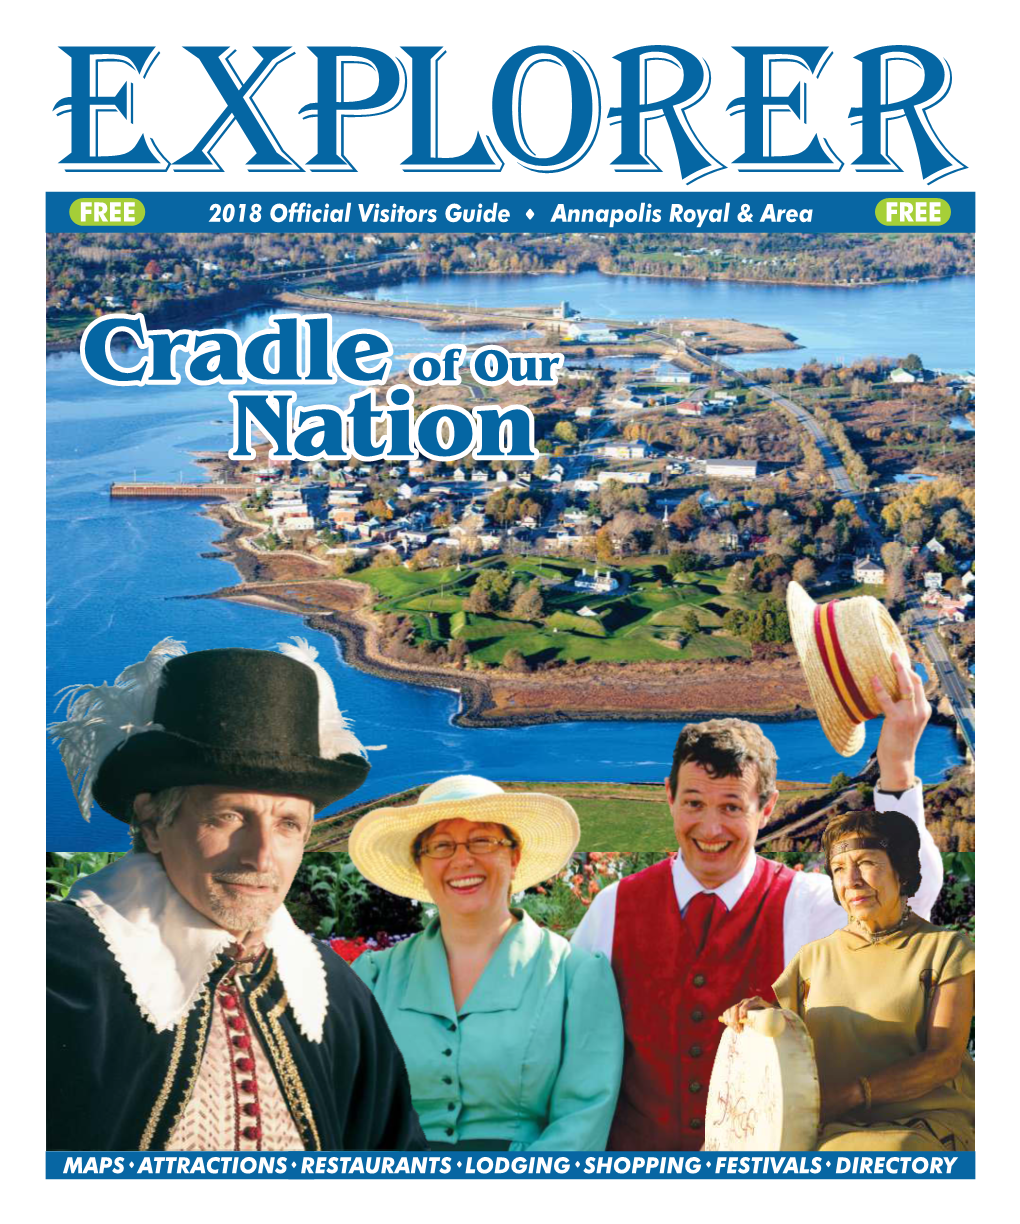 I Would Like to Congratulate the Explorer for Doing an Outstanding Job of Welcoming Visitors to the Annapolis Royal Area for 24 Years